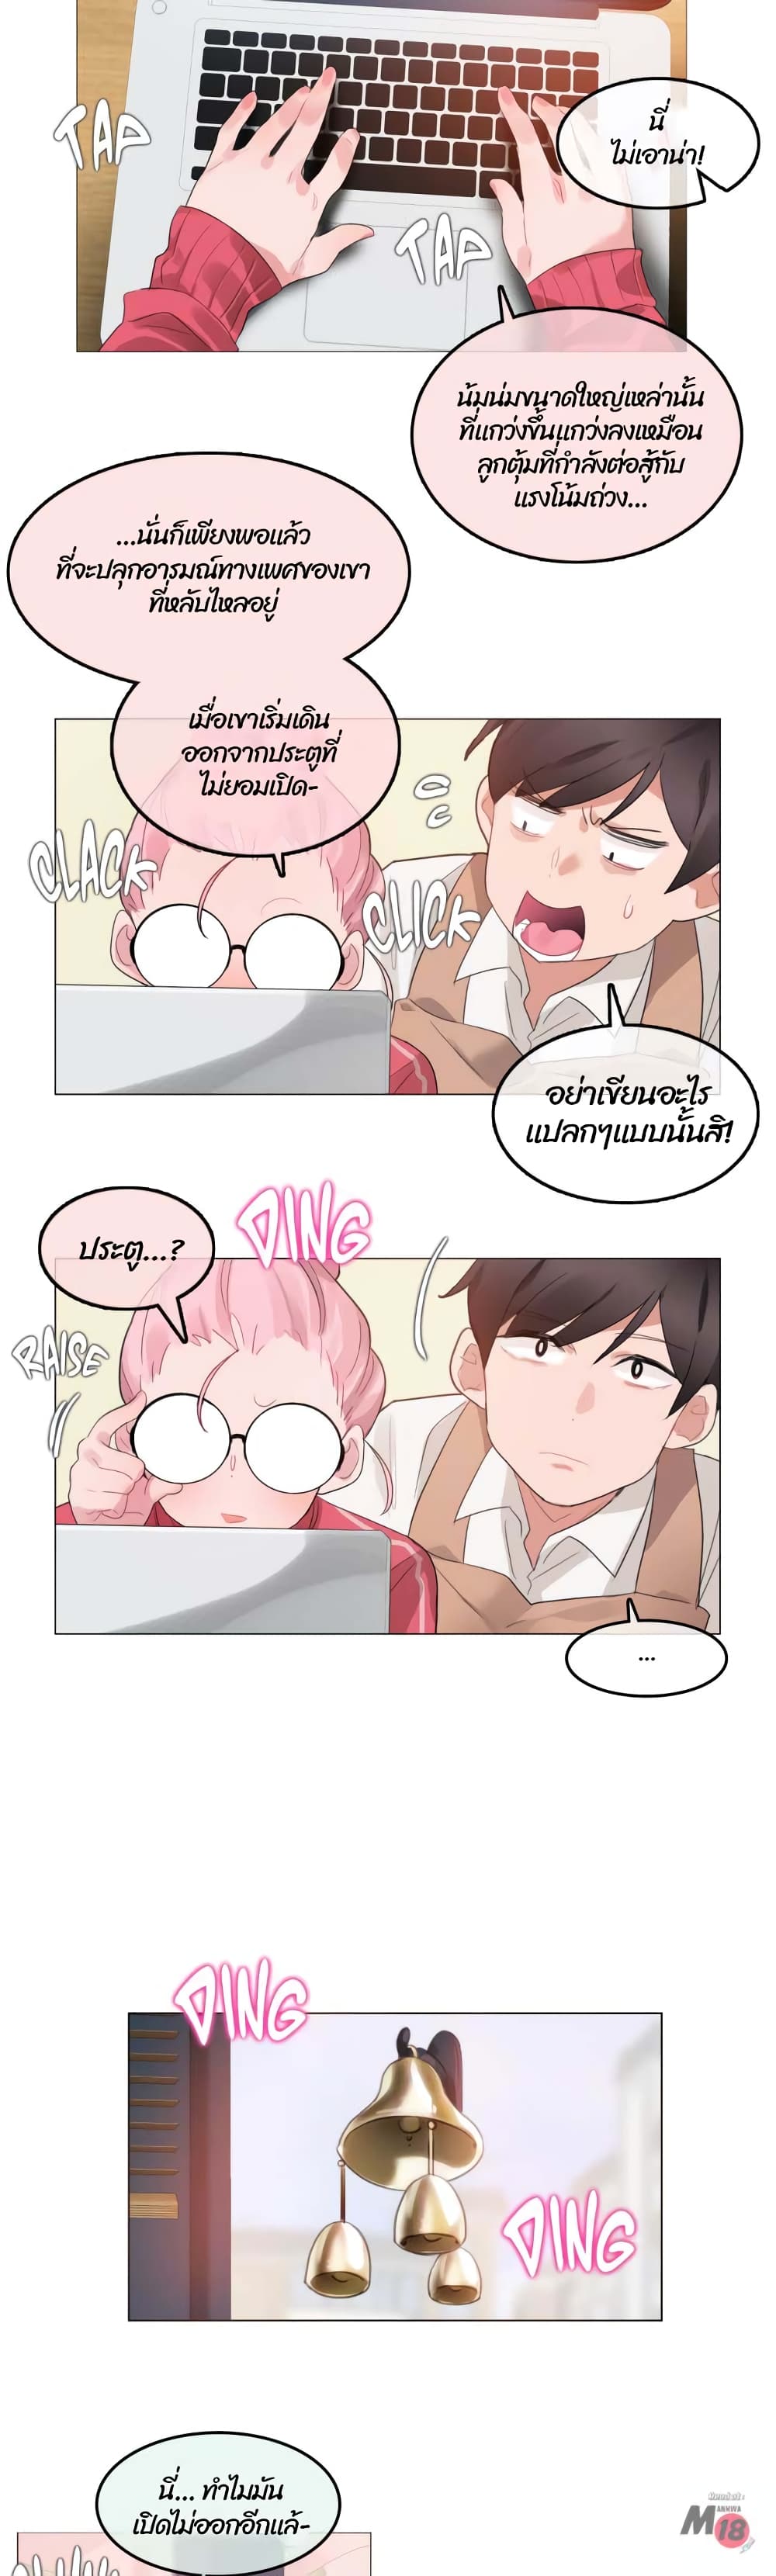 A Pervert's Daily Life 72 21